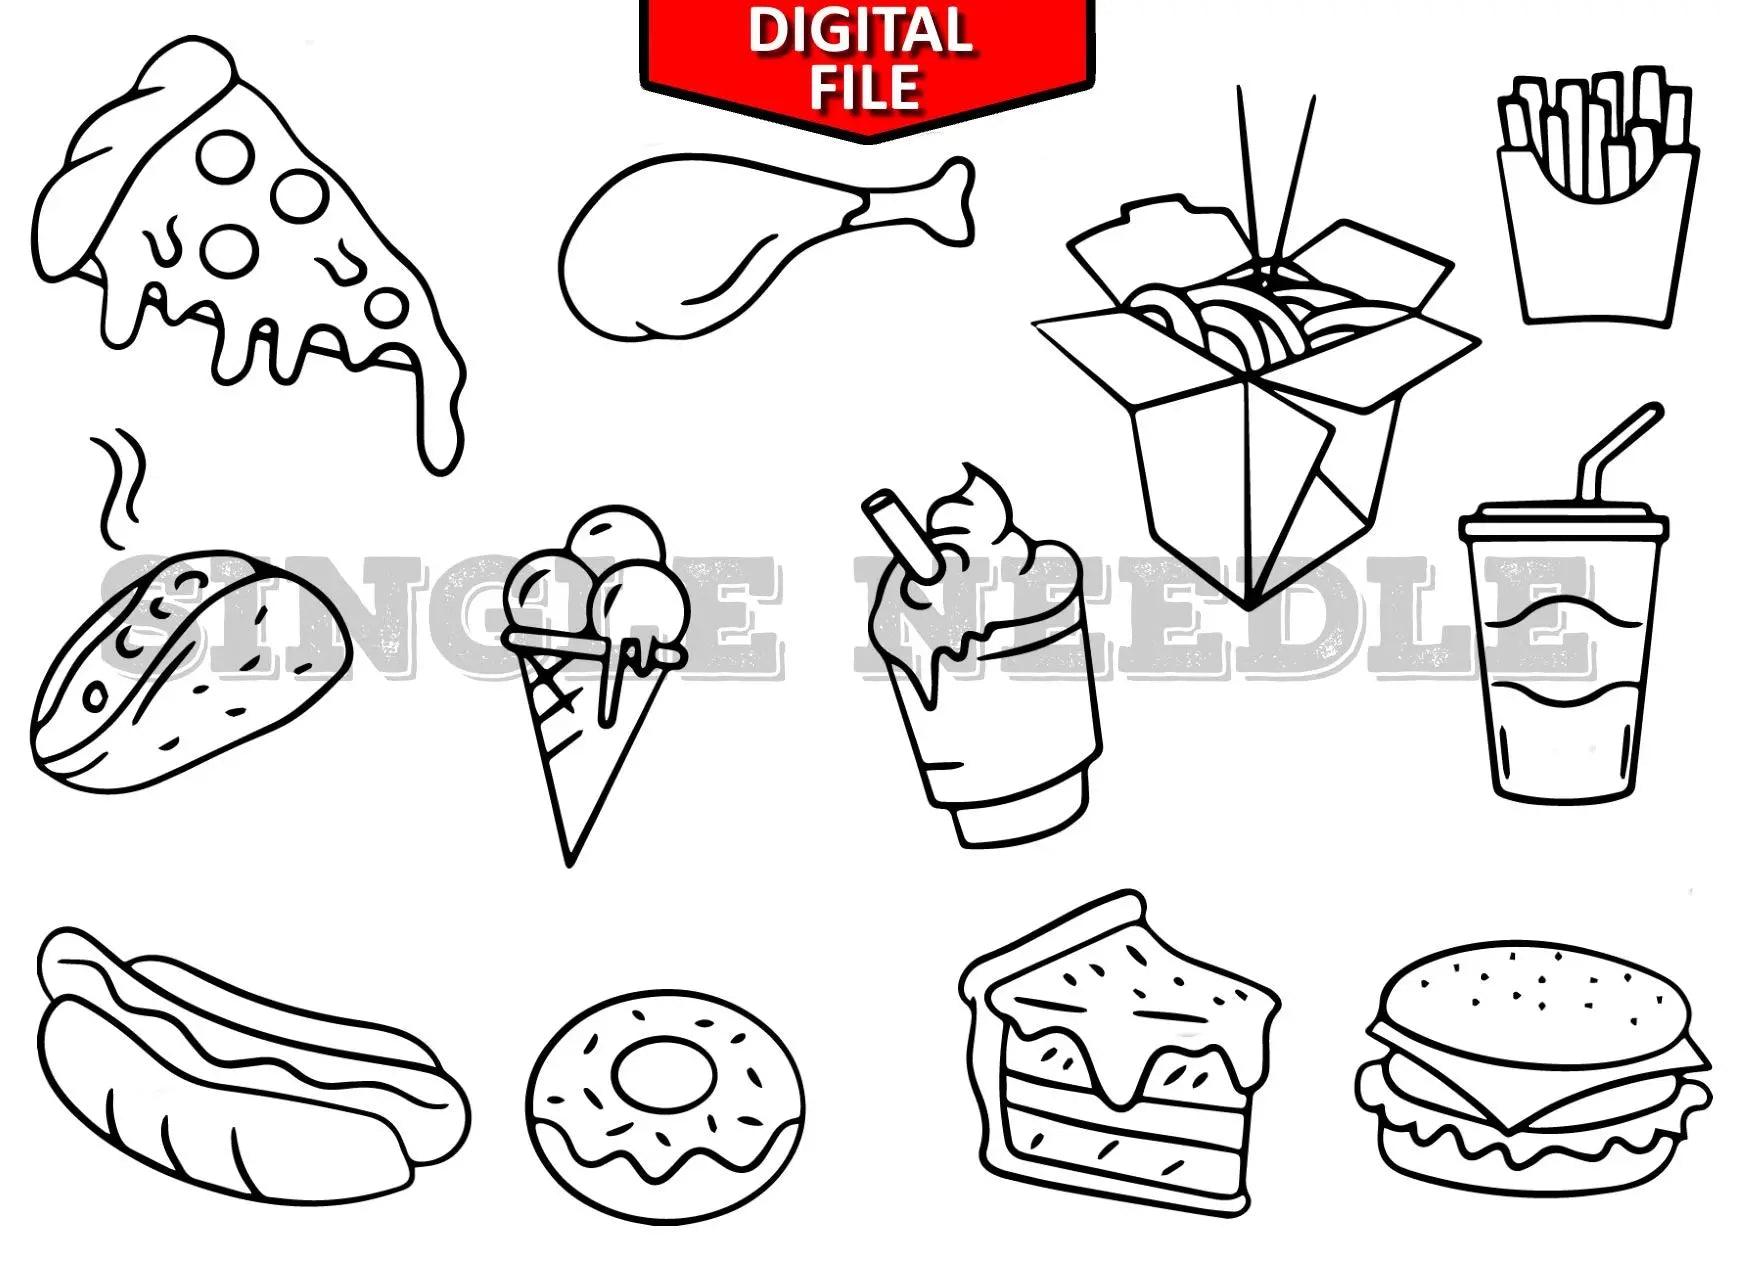 Fast Food Images Tattoo Flash Sheet Stencil for Real Stick and Poke Tattoos - SINGLE NEEDLE